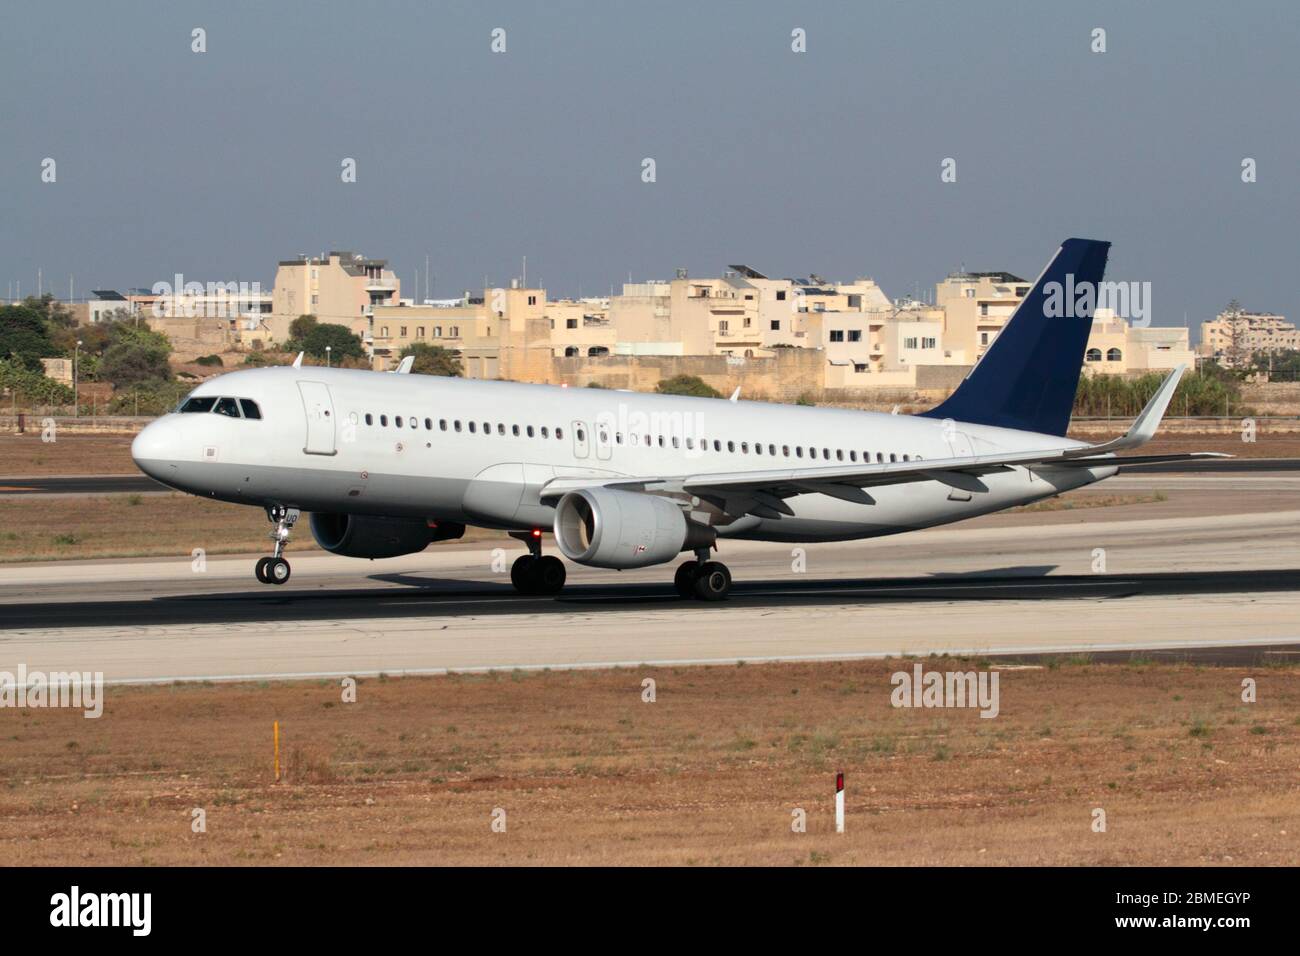 Airbus A320 airliner jet plane aircraft airplane taking off takeoff runway modern air travel civil aviation Stock Photo